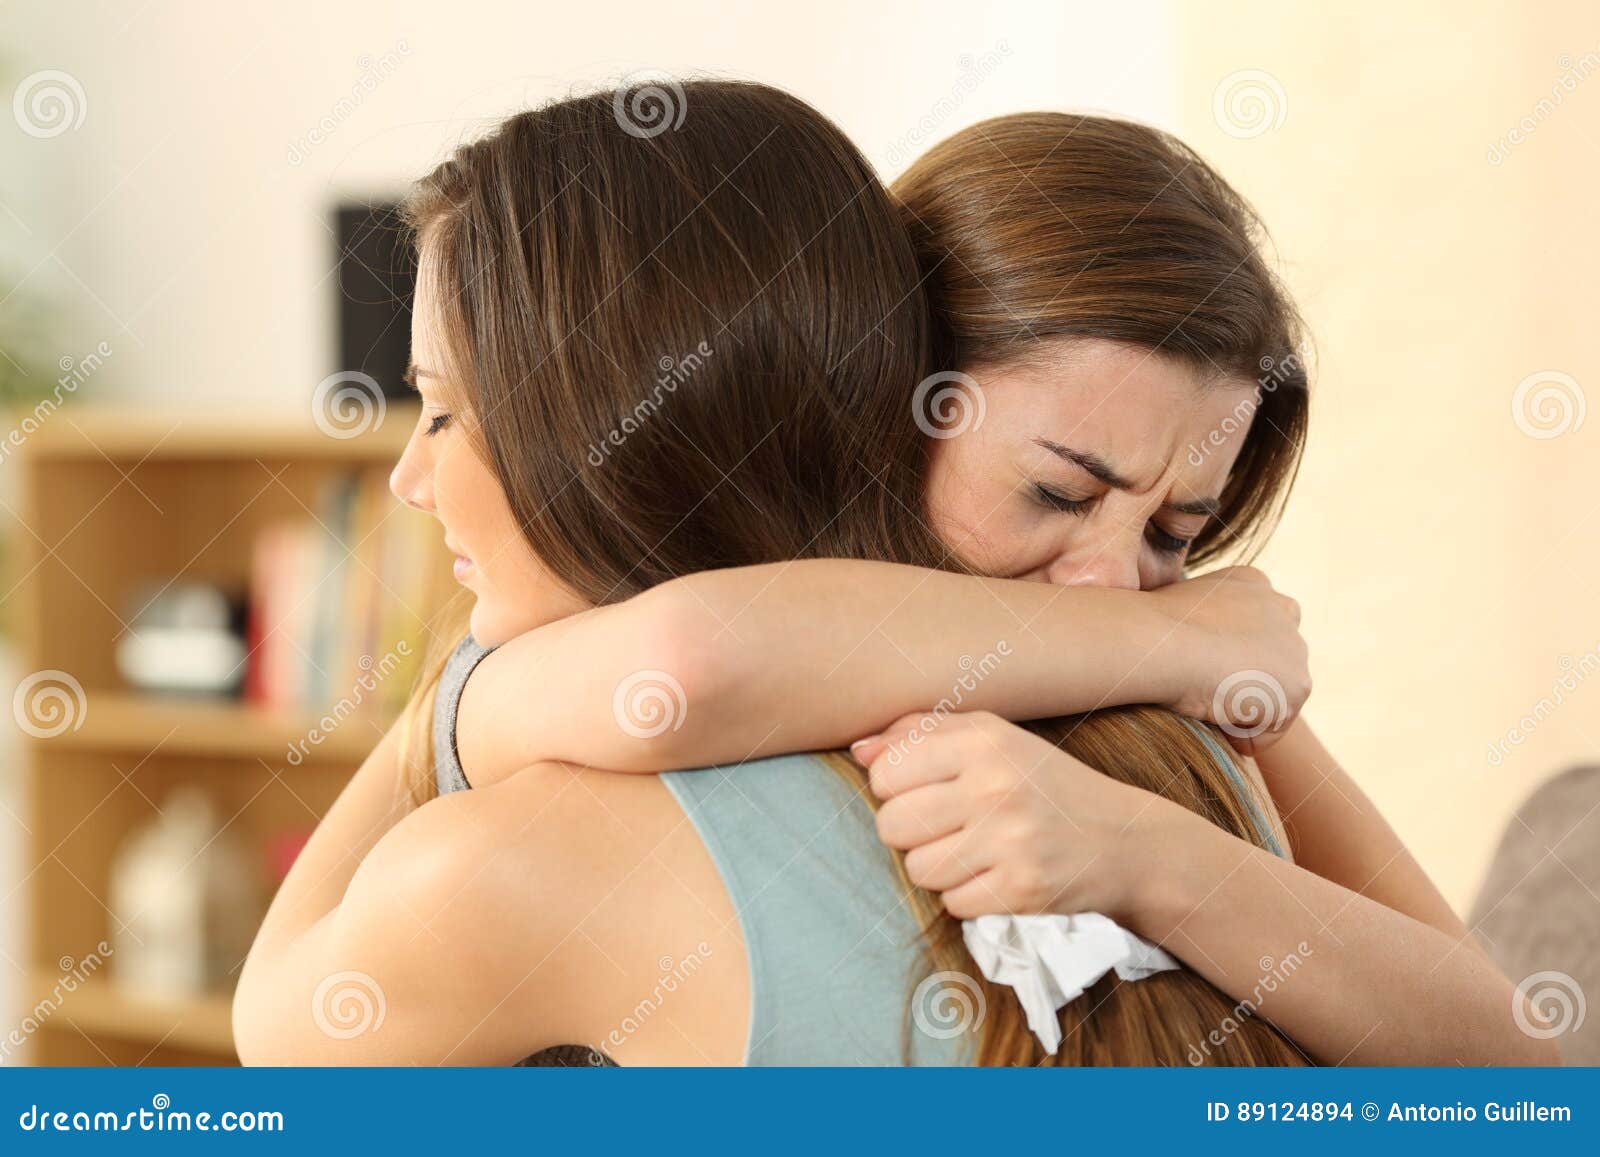 girl consoling to her sad best friend